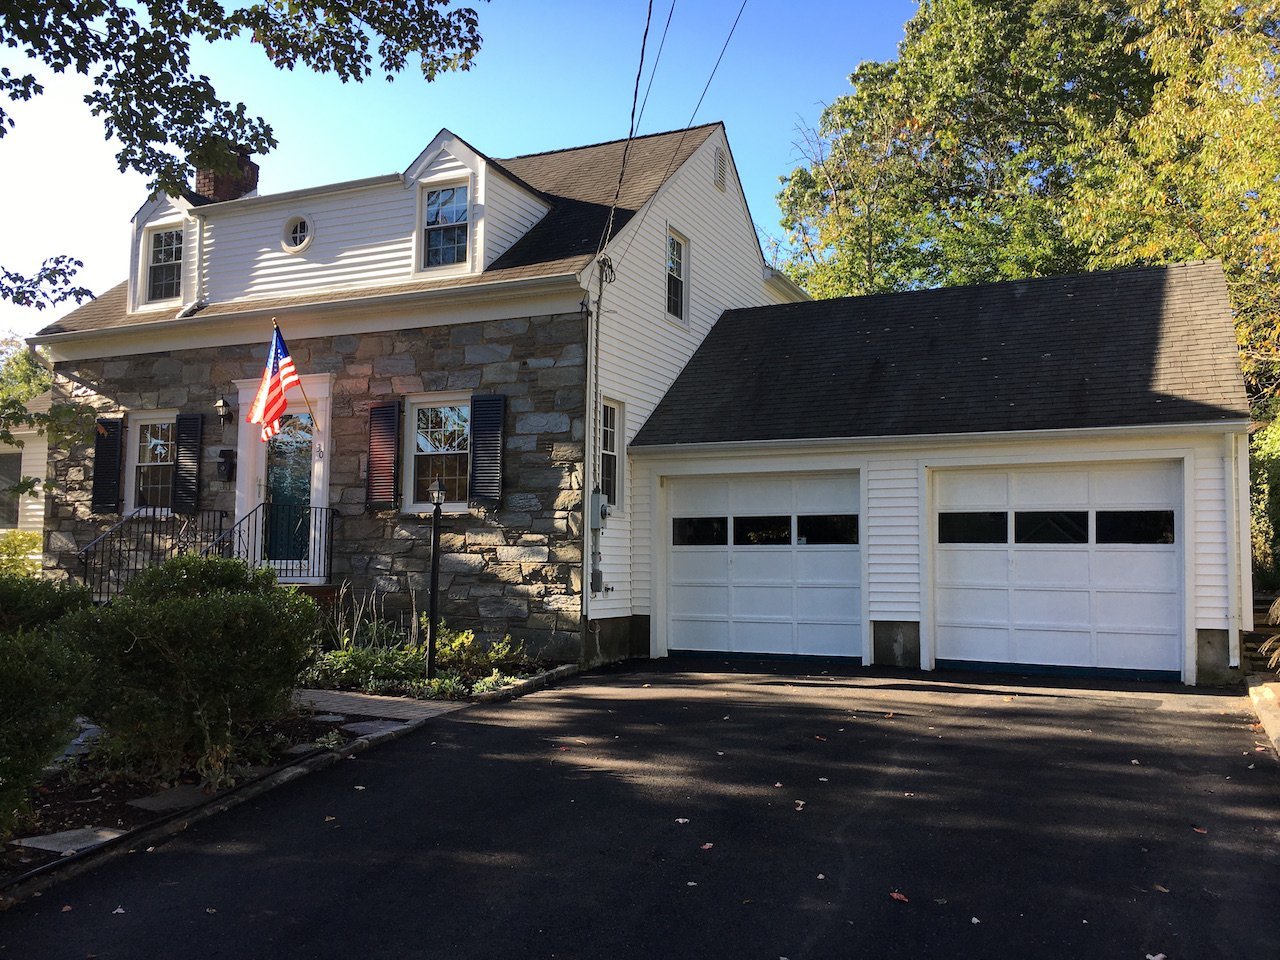 House for Sale in Madison NJ. 30 Longview Ave Madison NJ 07940 is For Sale 